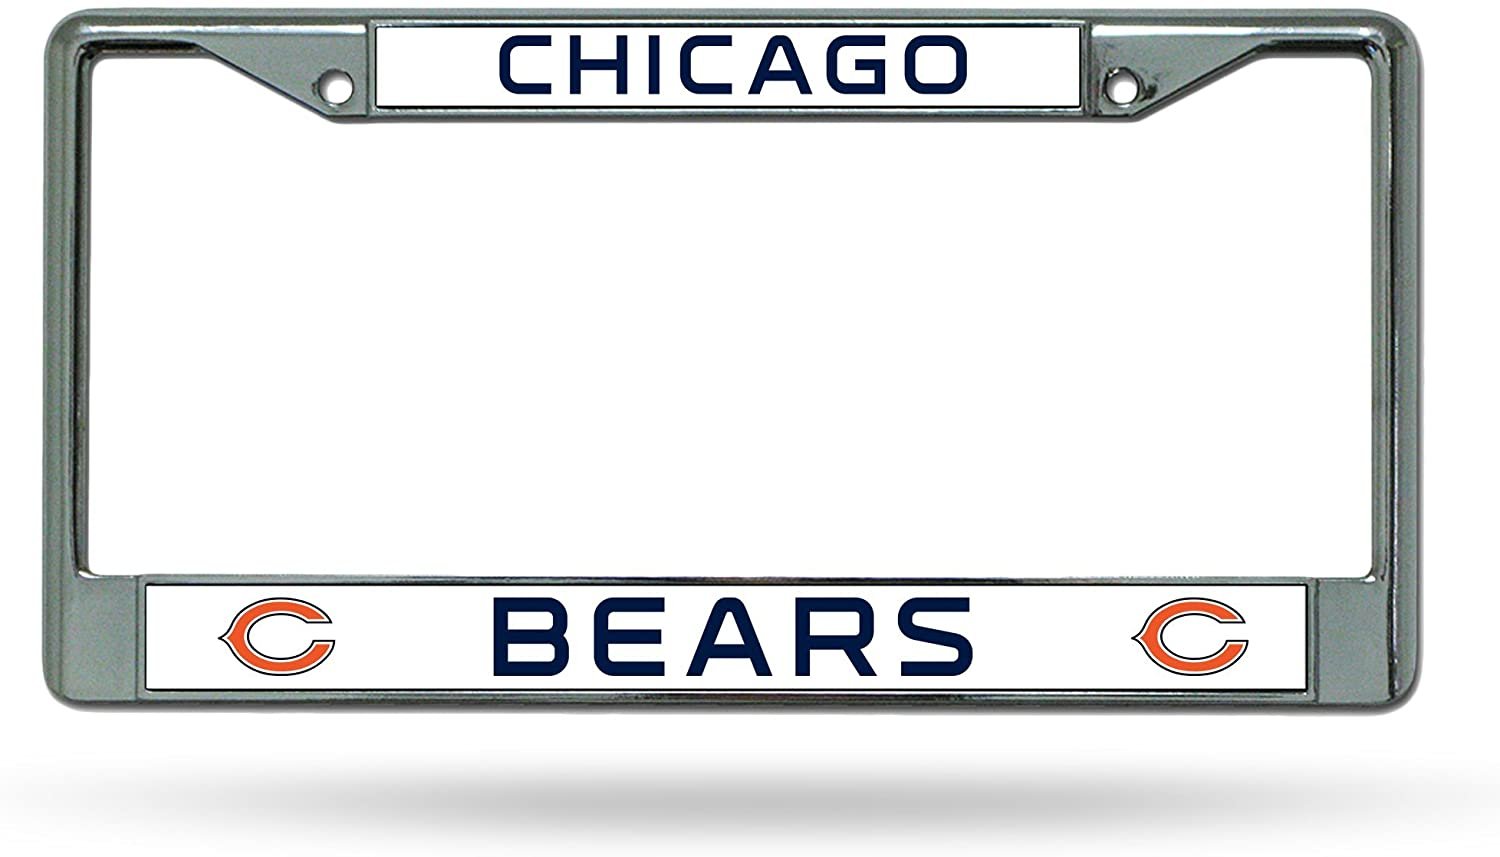 Chicago Bears Premium Metal License Plate Frame Chrome Tag Cover, 12x6 Inch